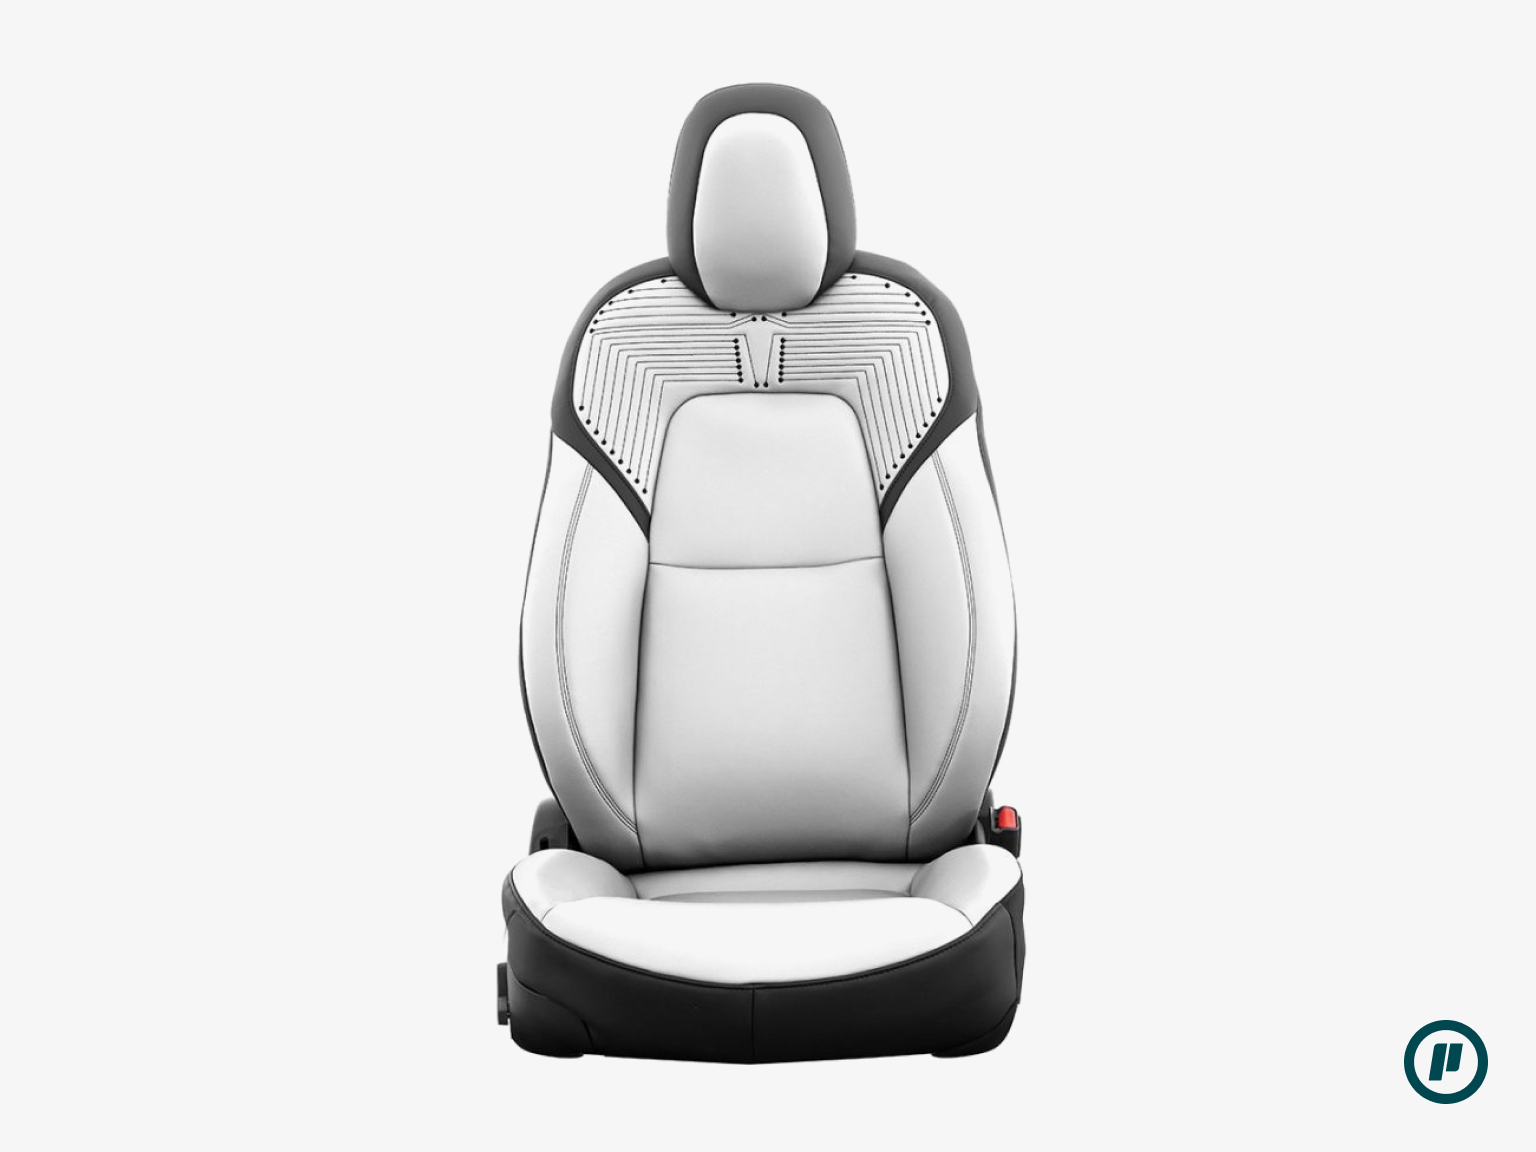 Startech Seat Covers made of Vegan Leather for Tesla Model 3 (2017+)